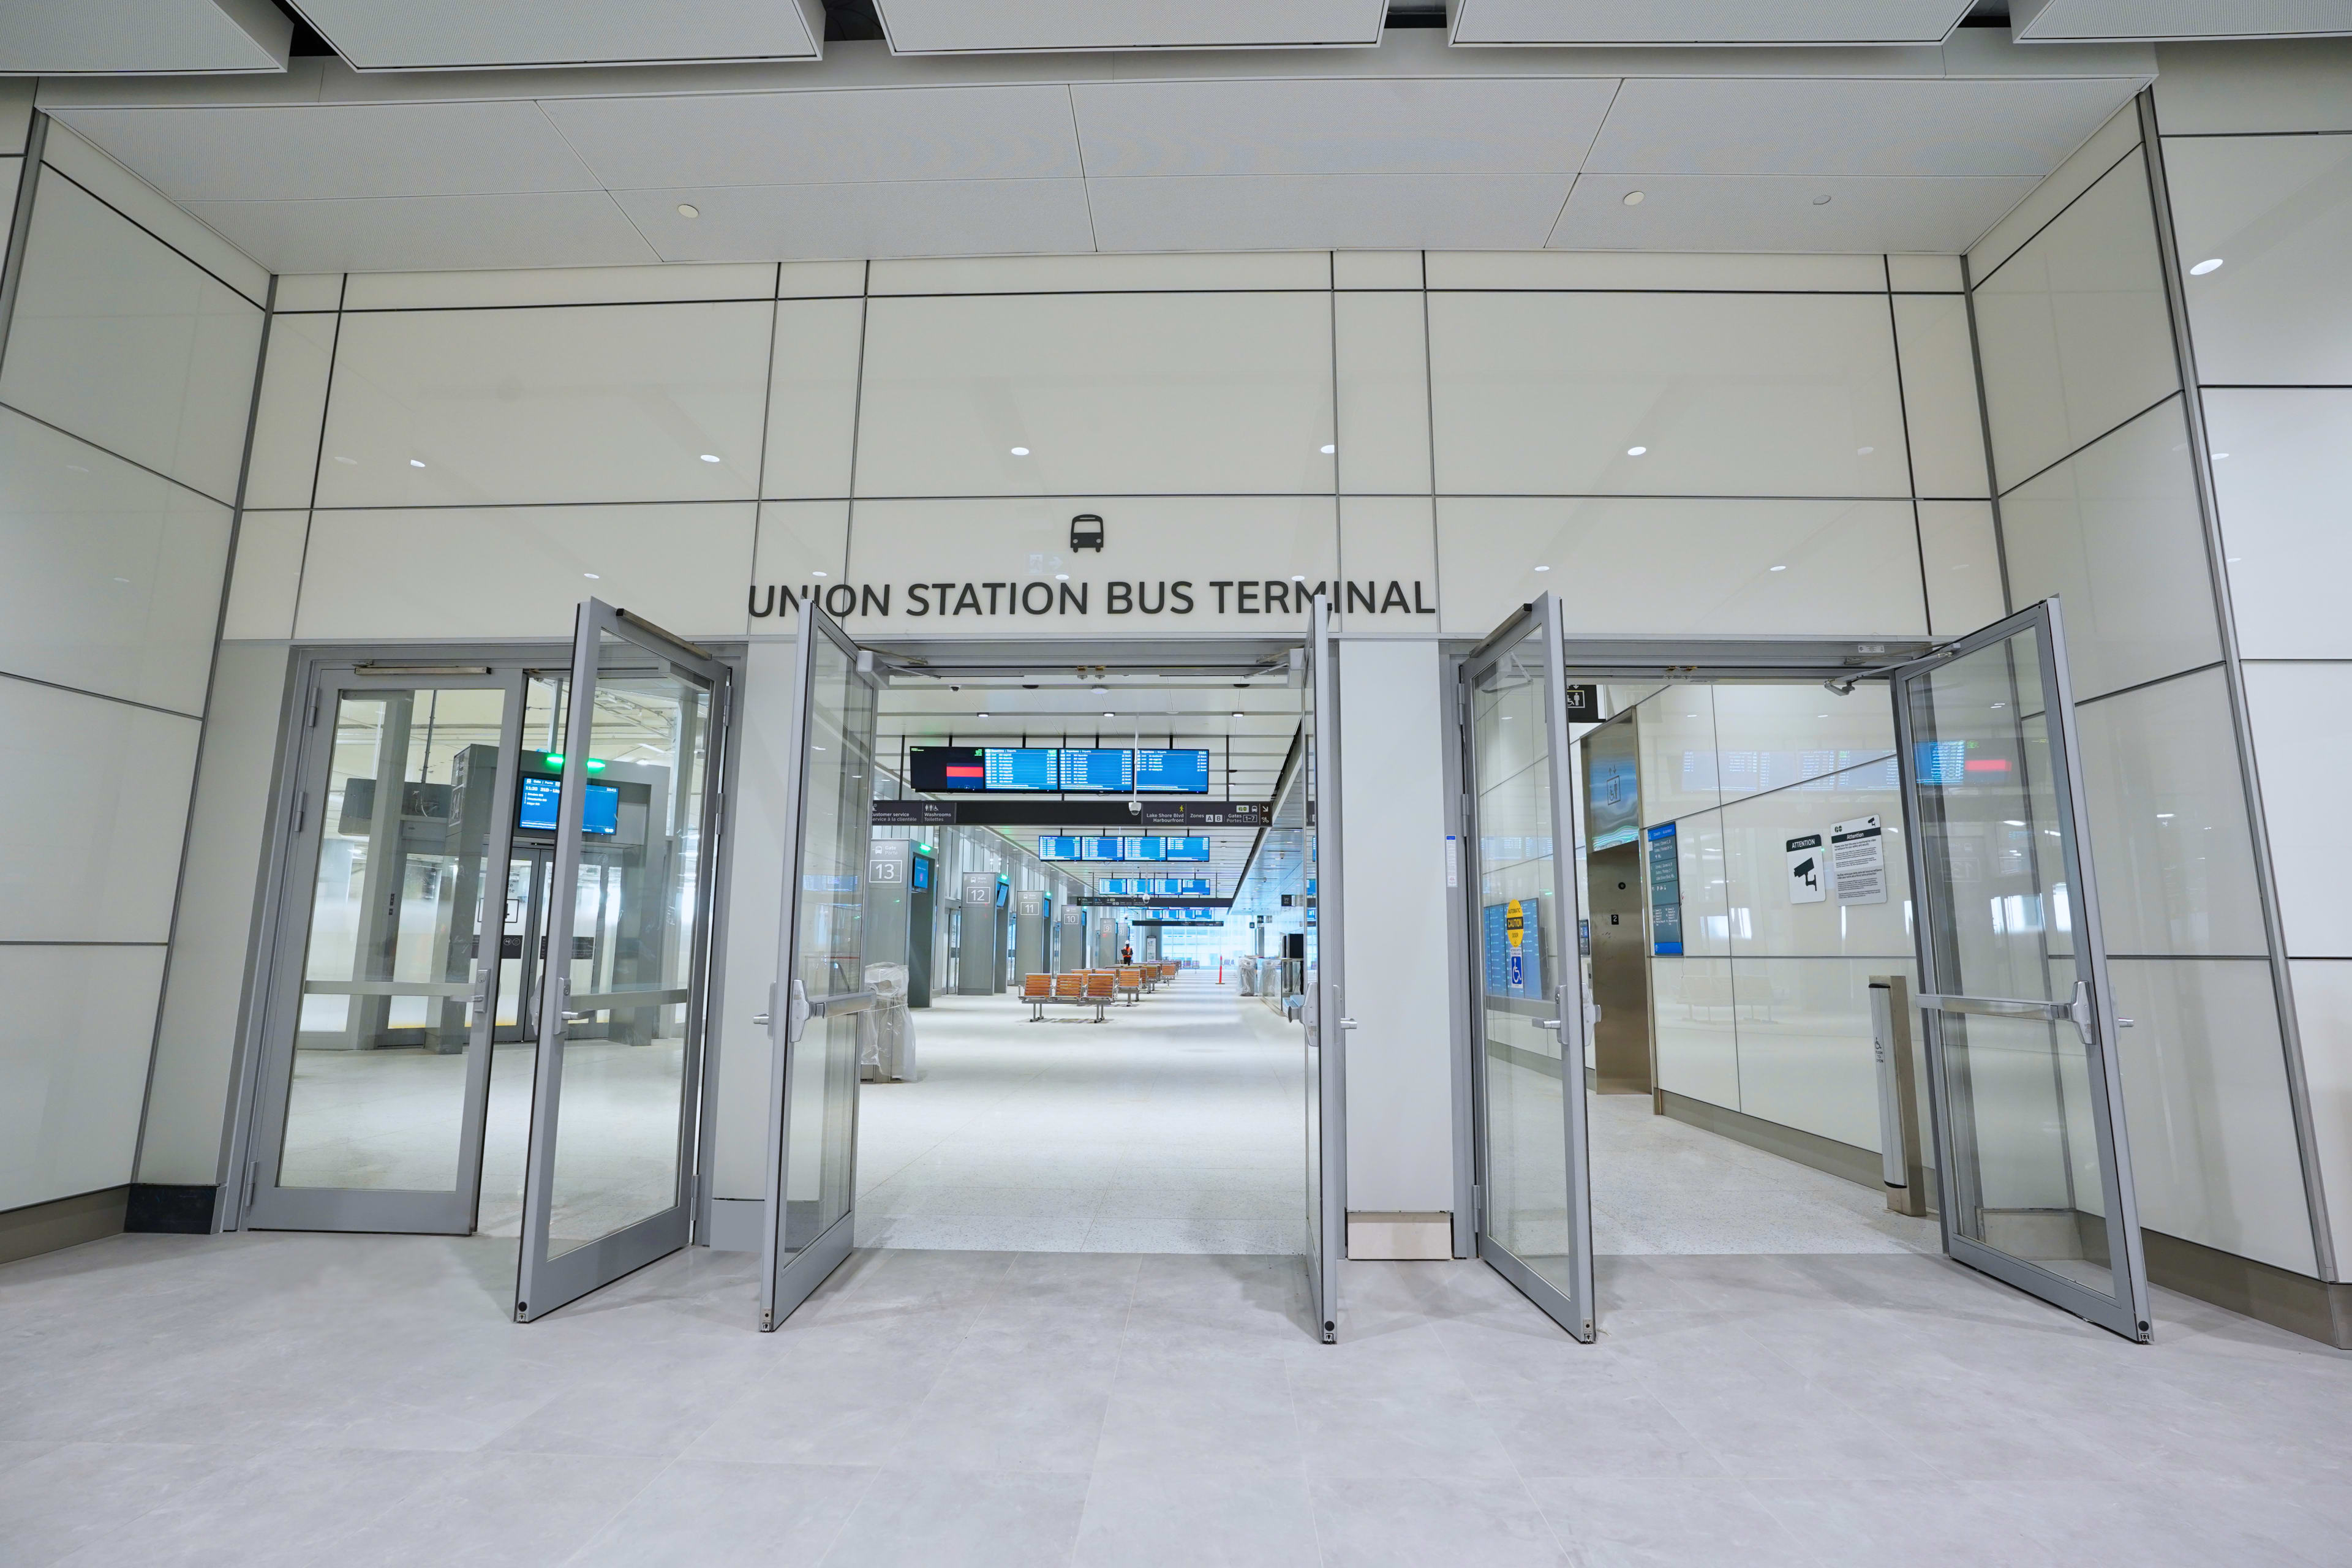 the doors open at the new bus terminal with the Union Station bus terminal sign